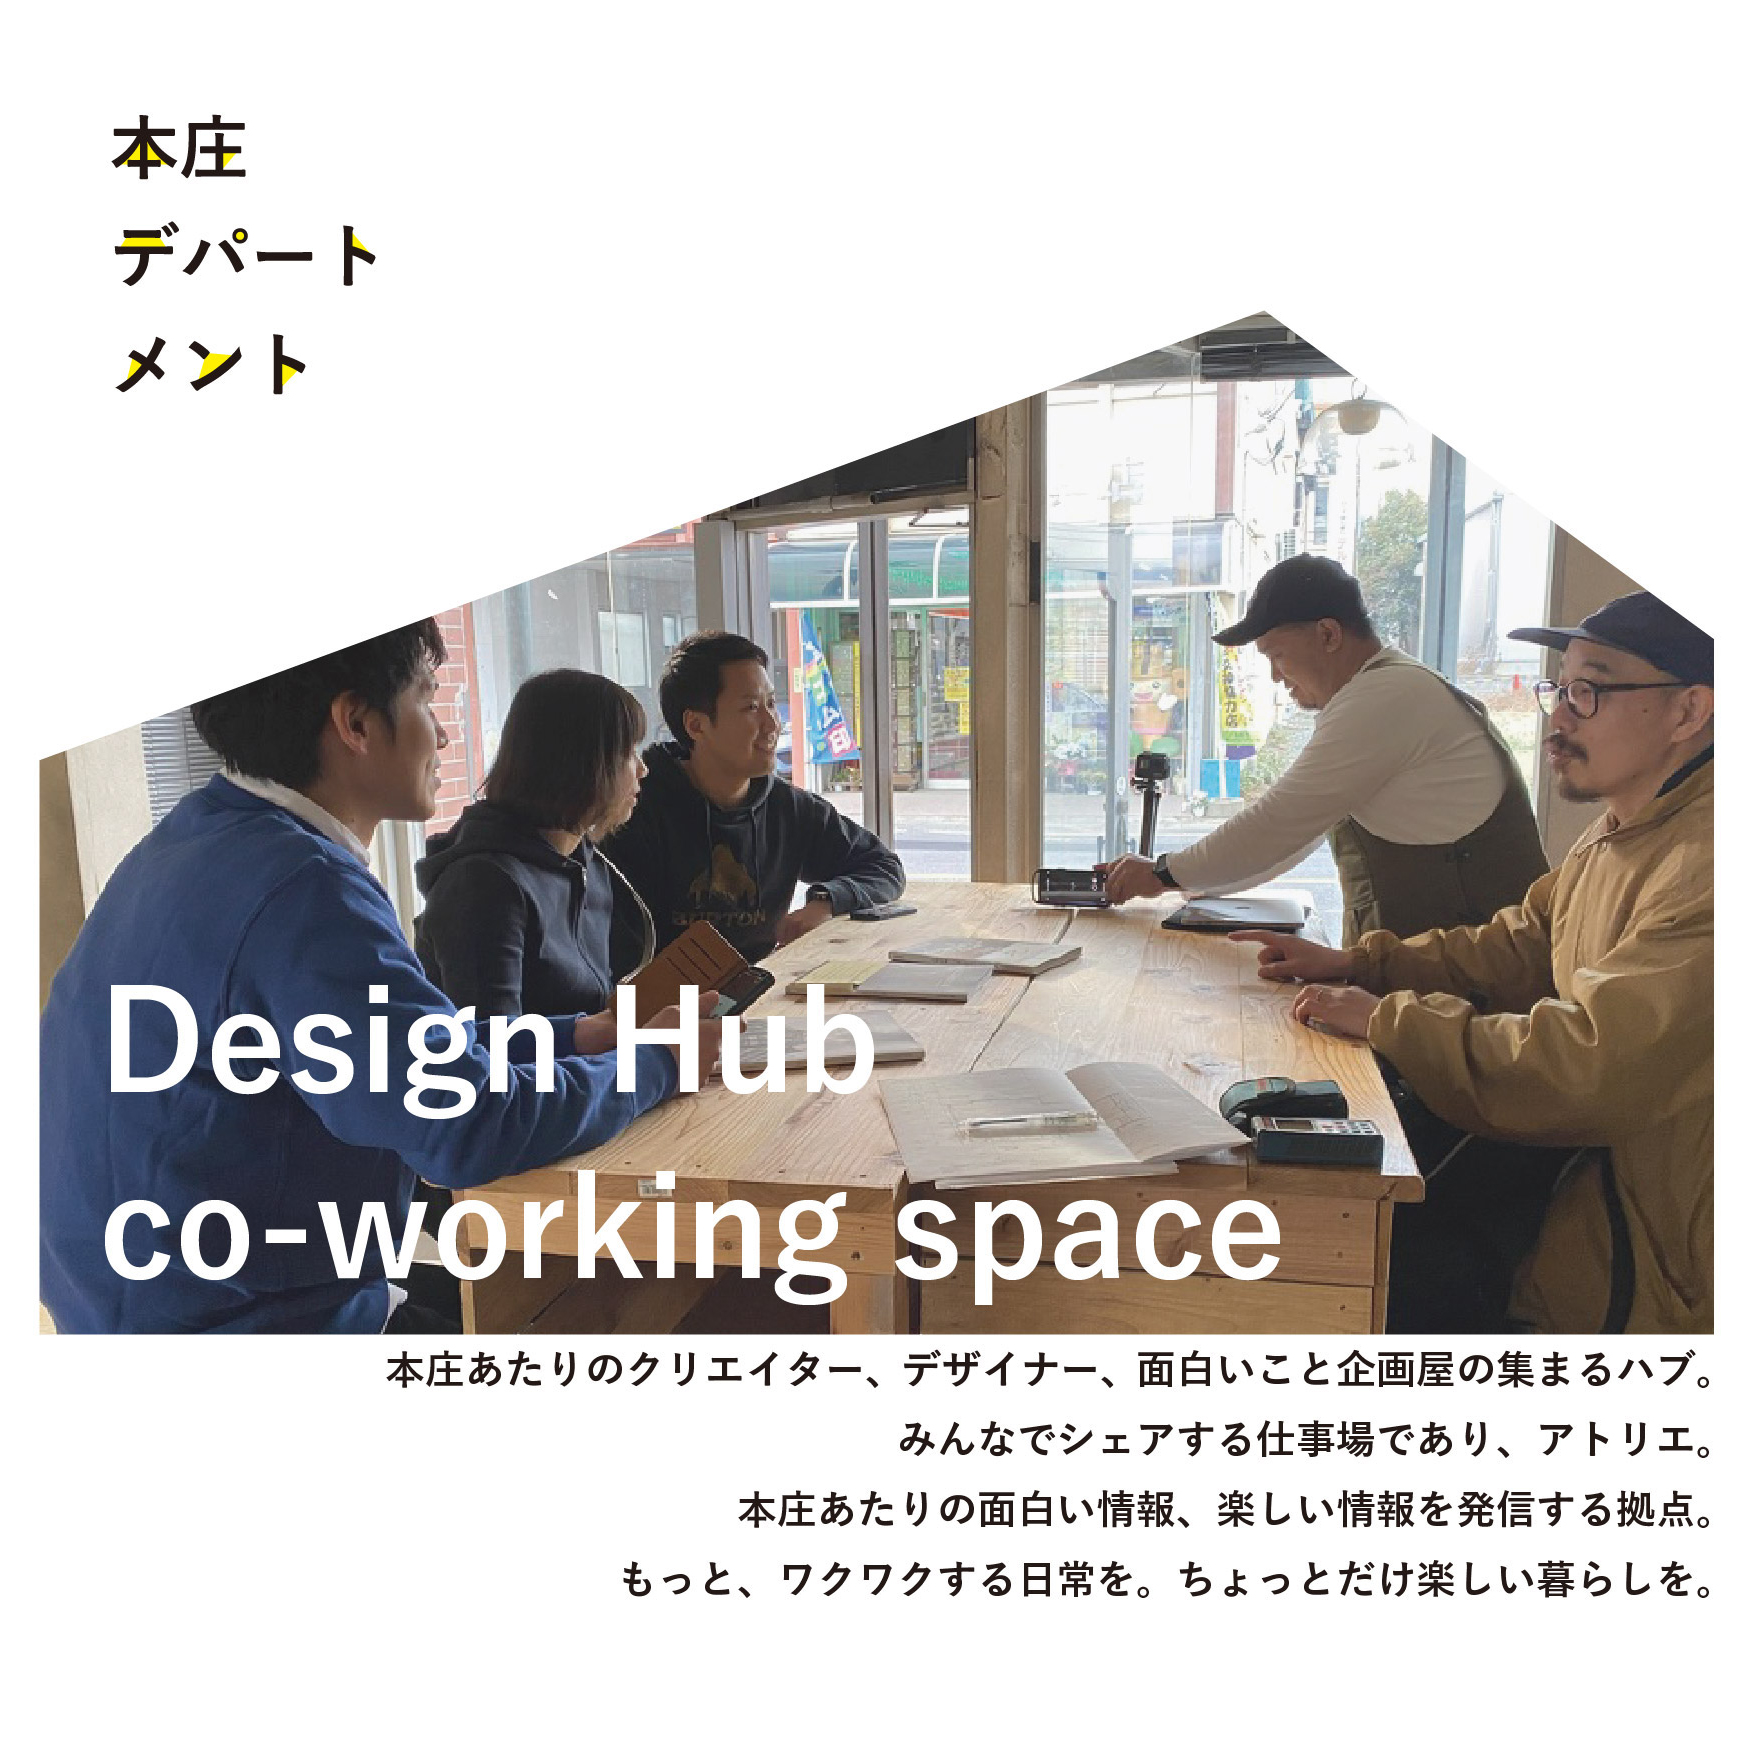 co-working space写真